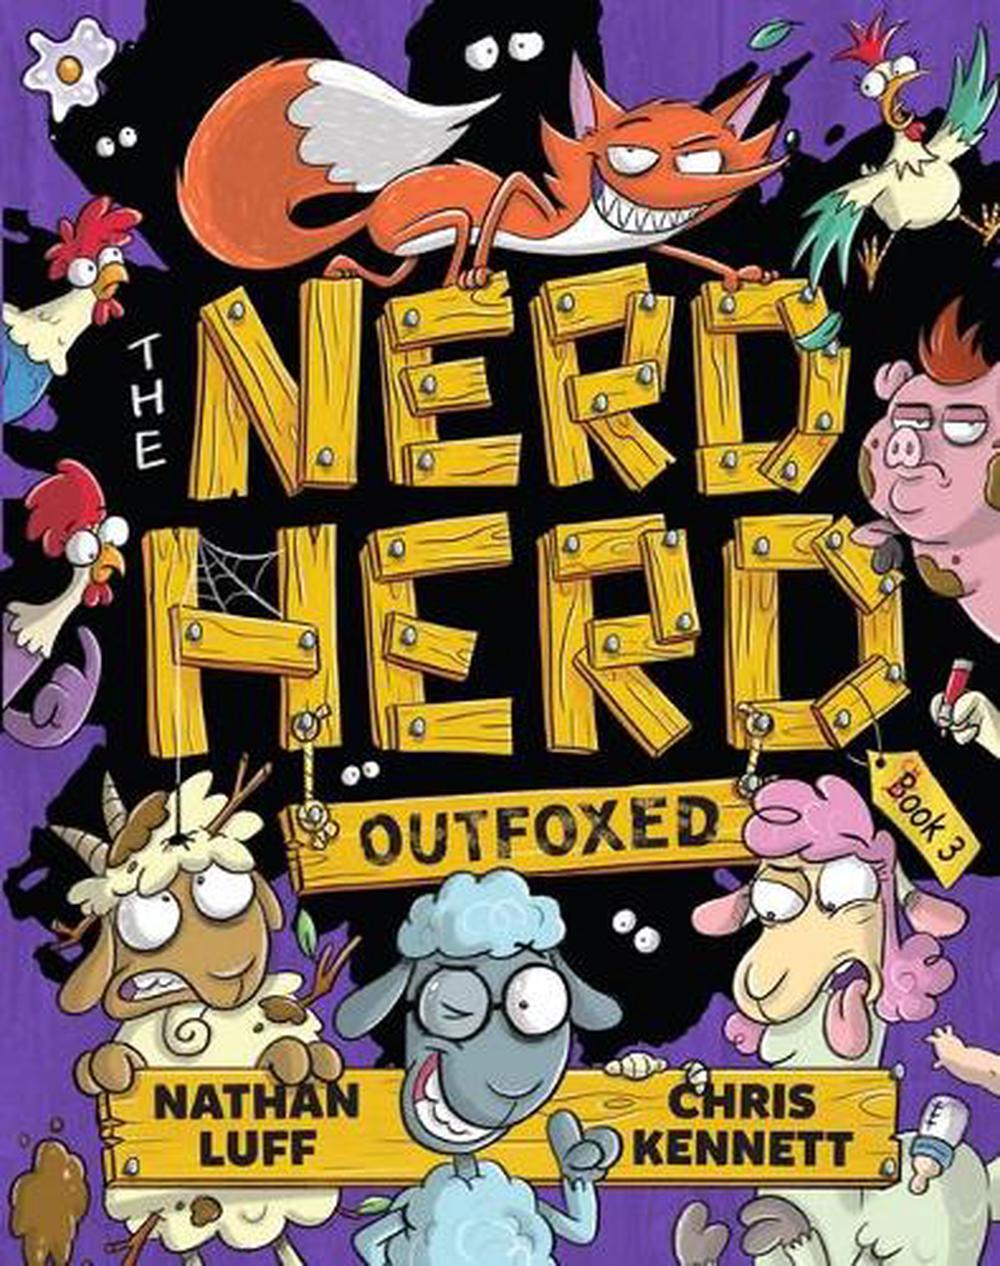 The Nerd Herd #3: Outfoxed by LUFF Nathan Paperback Book - Zdjęcie 1 z 1